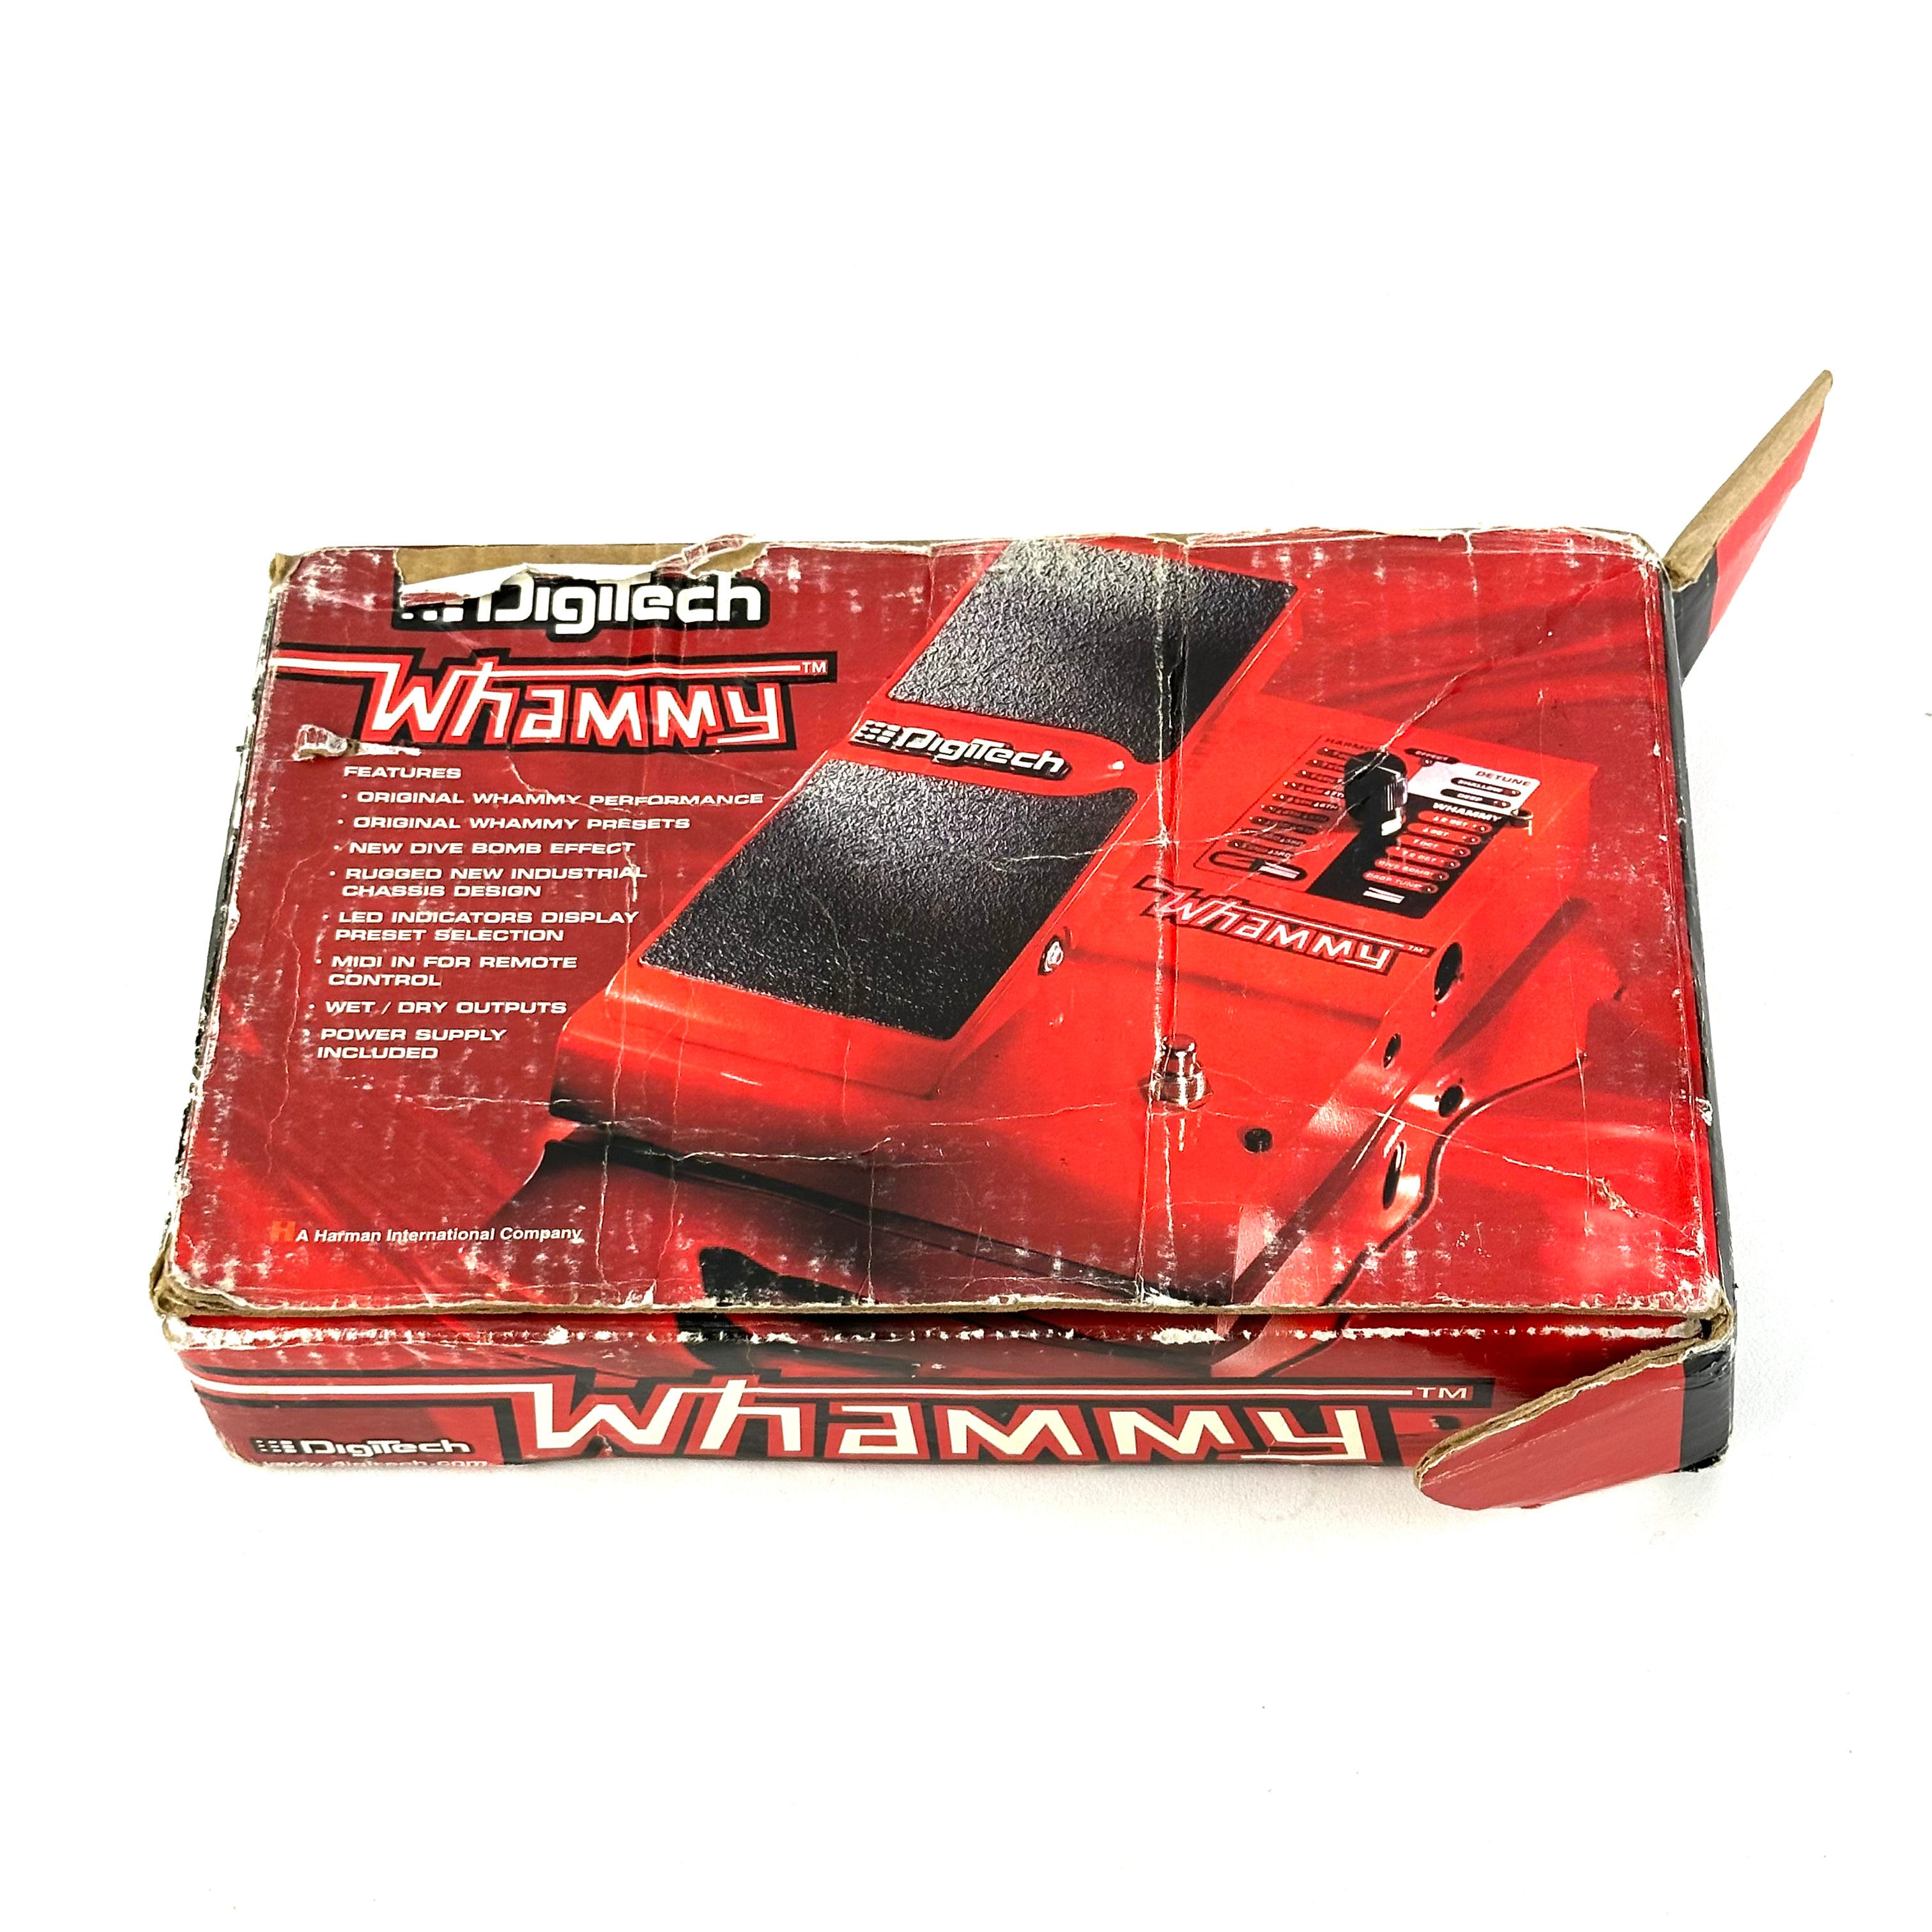 PRE-OWNED WHAMMY 4 PEDAL